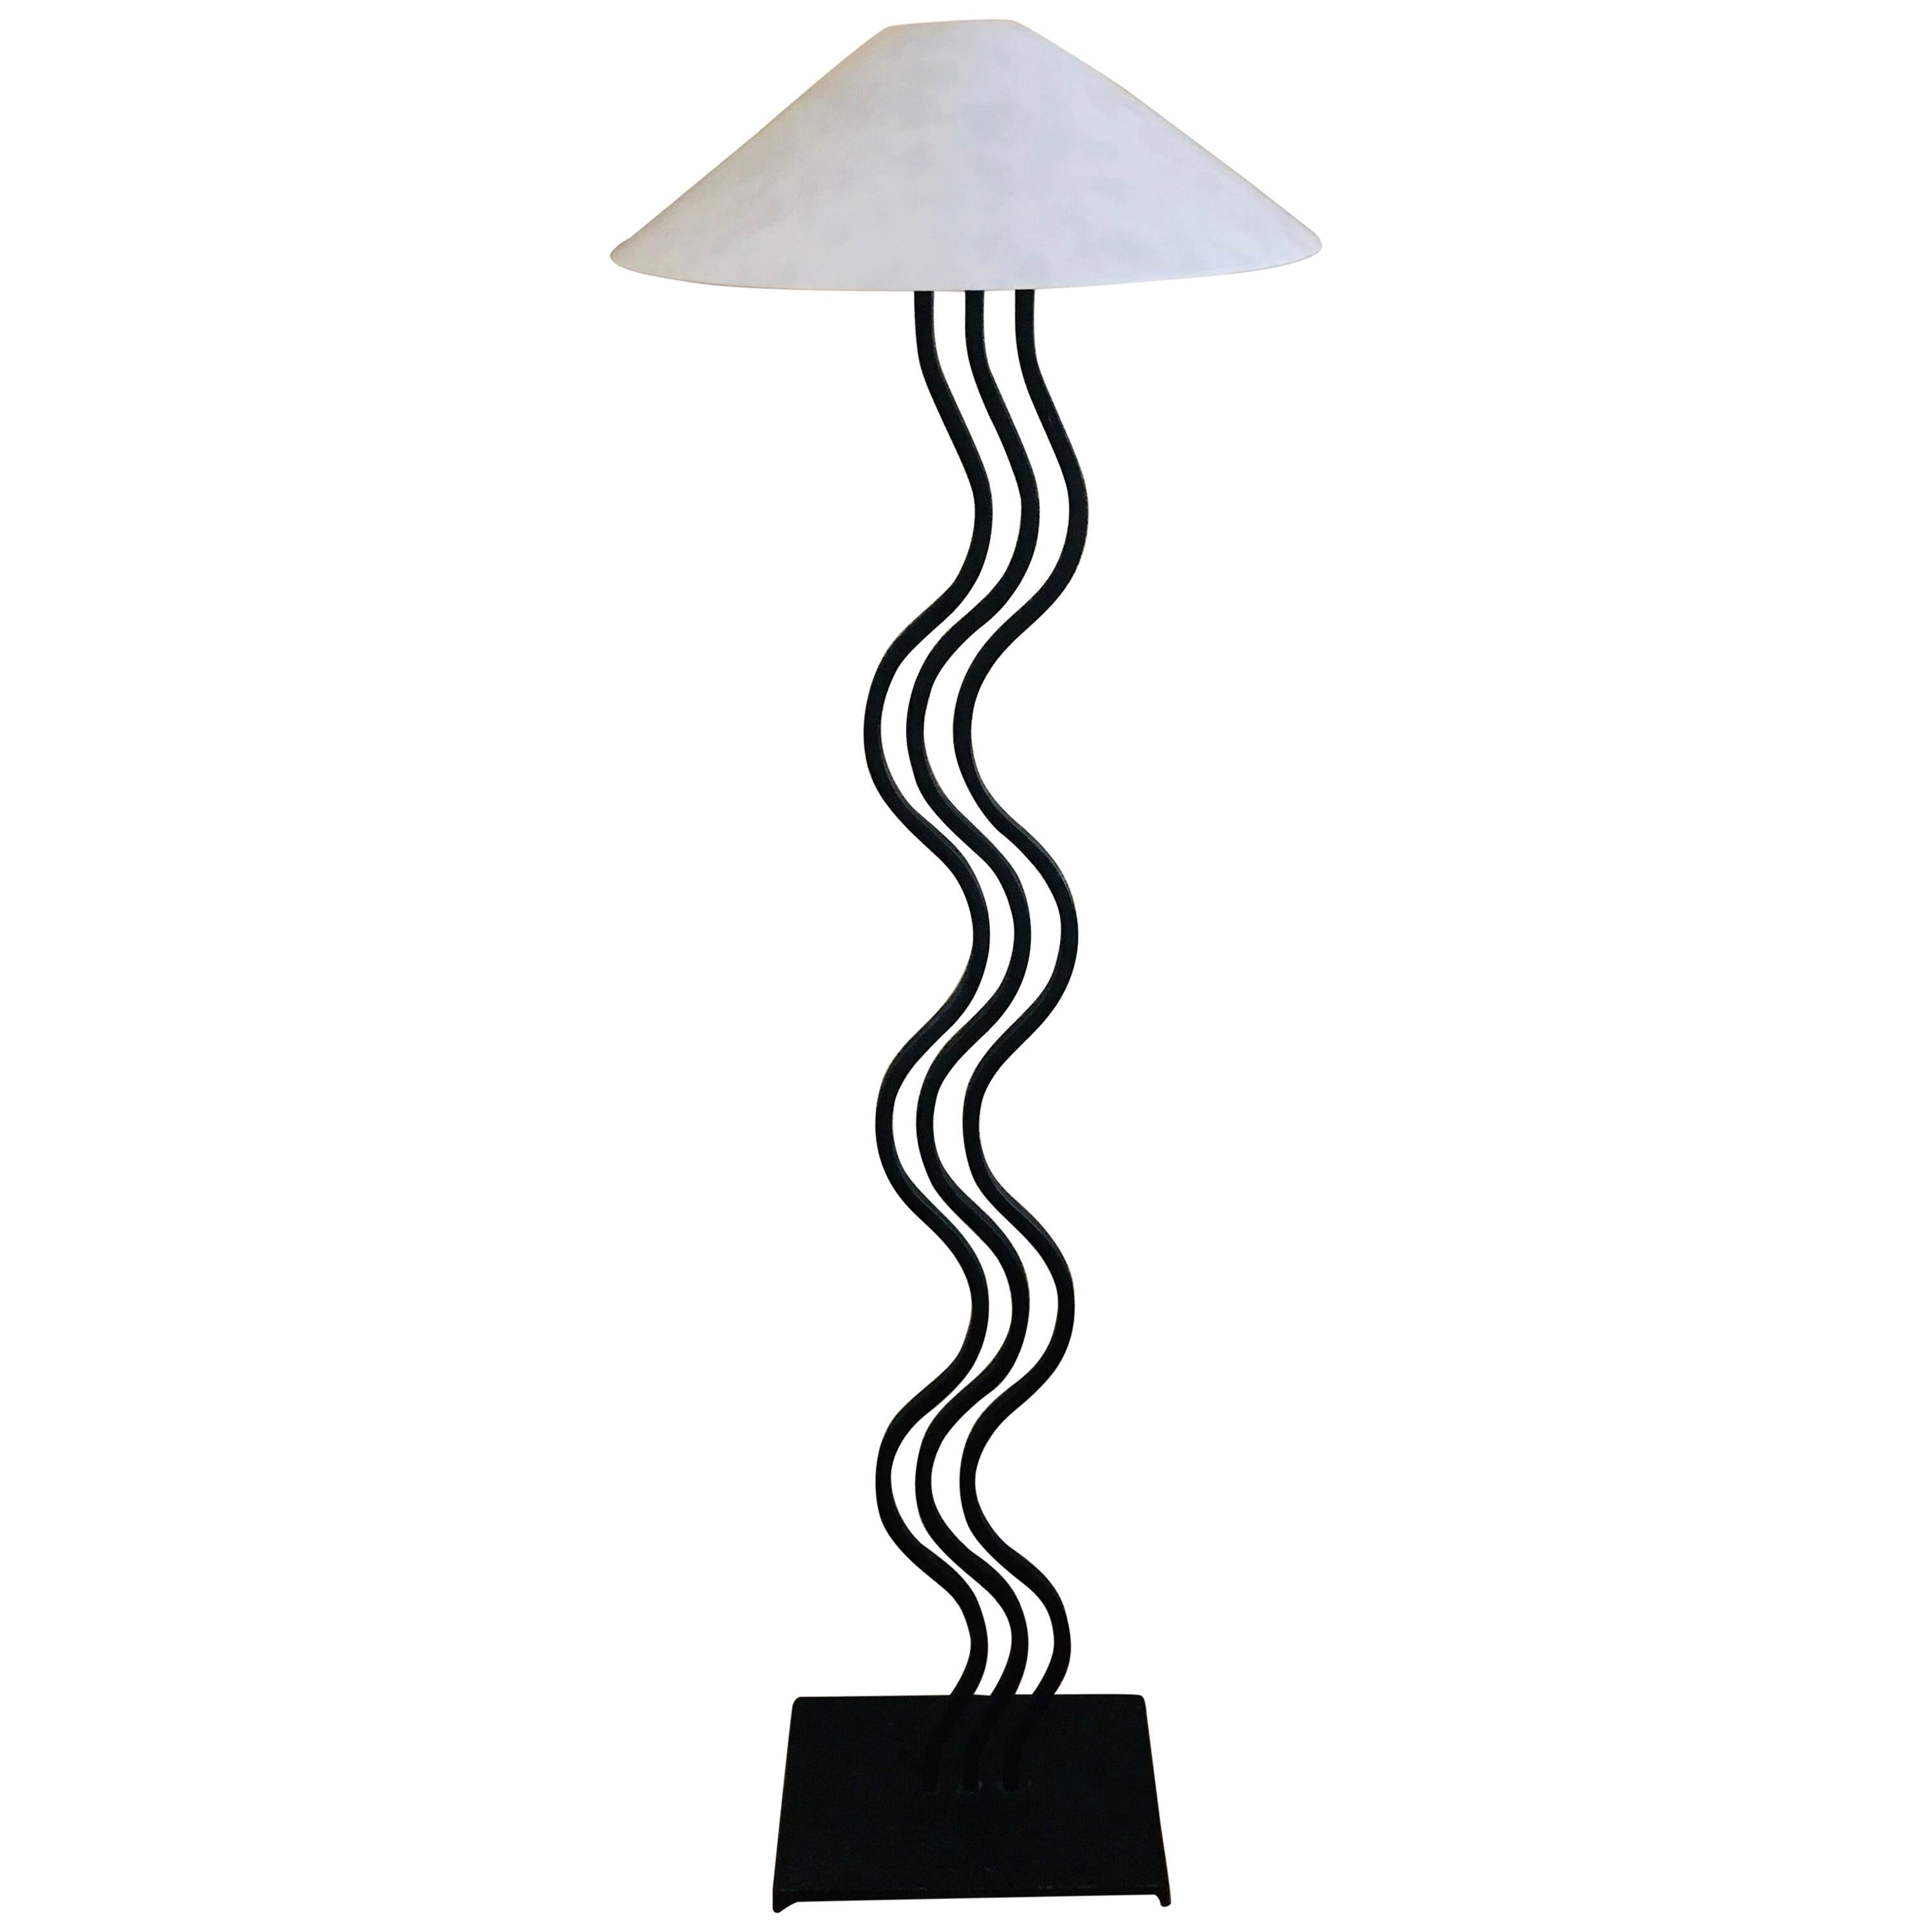 Postmodern Memphis Style Sculptural Curved Wave Floor Lamp by Alsy, 1980s